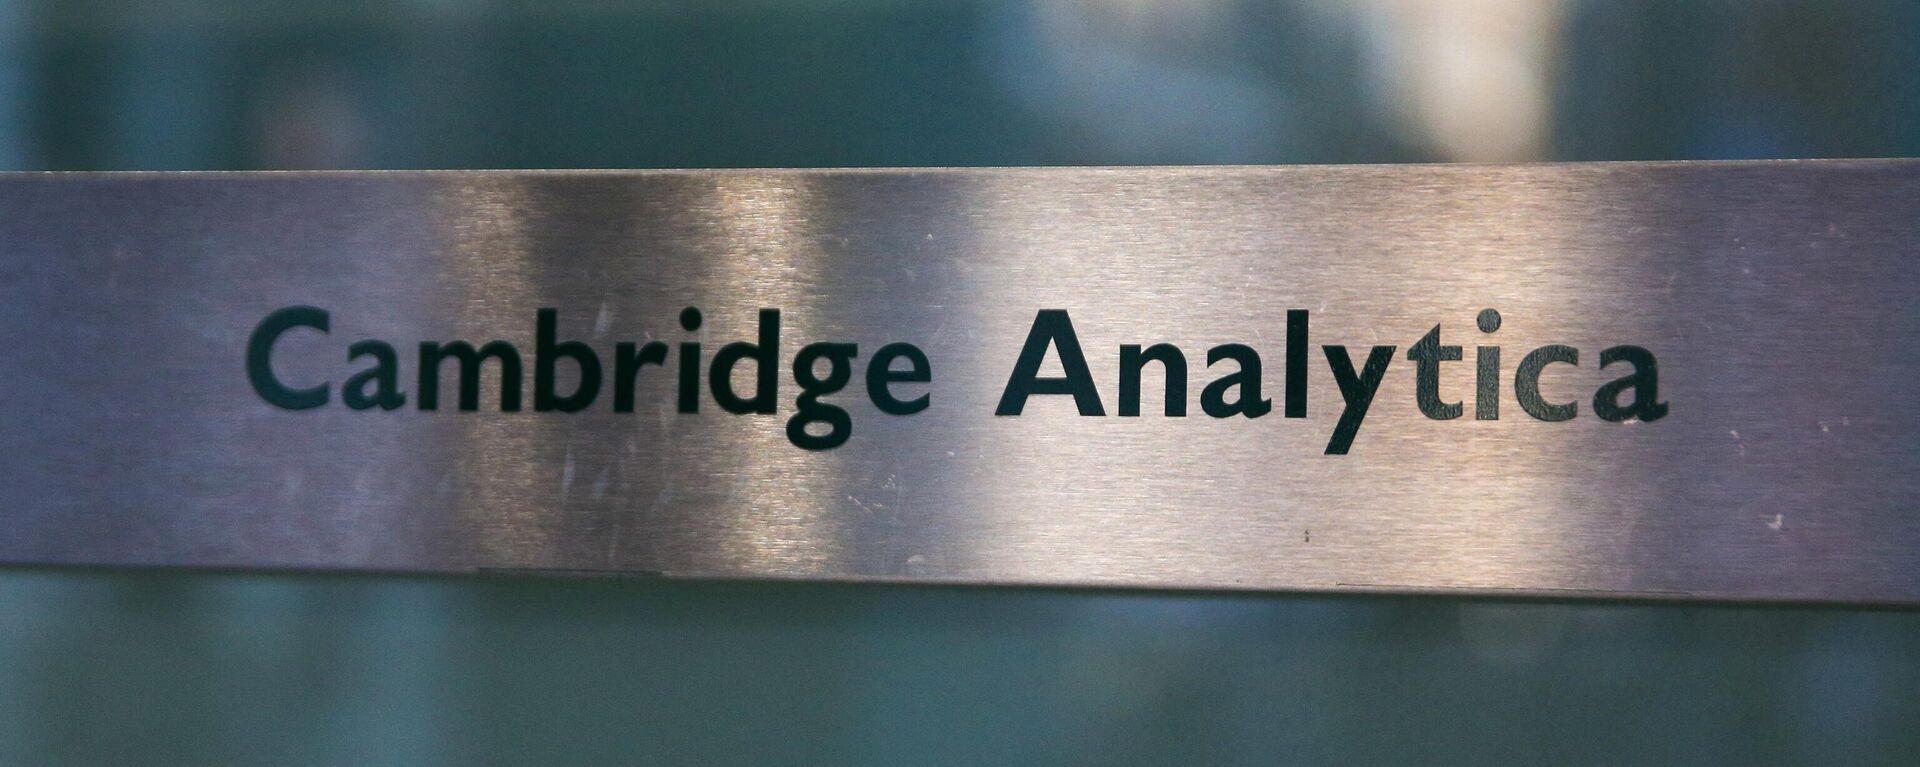 A Cambridge Analytica sign is pictured at the entrance of the building which houses the offices of Cambridge Analytica, in central London on March 21, 2018 - Sputnik International, 1920, 16.02.2023